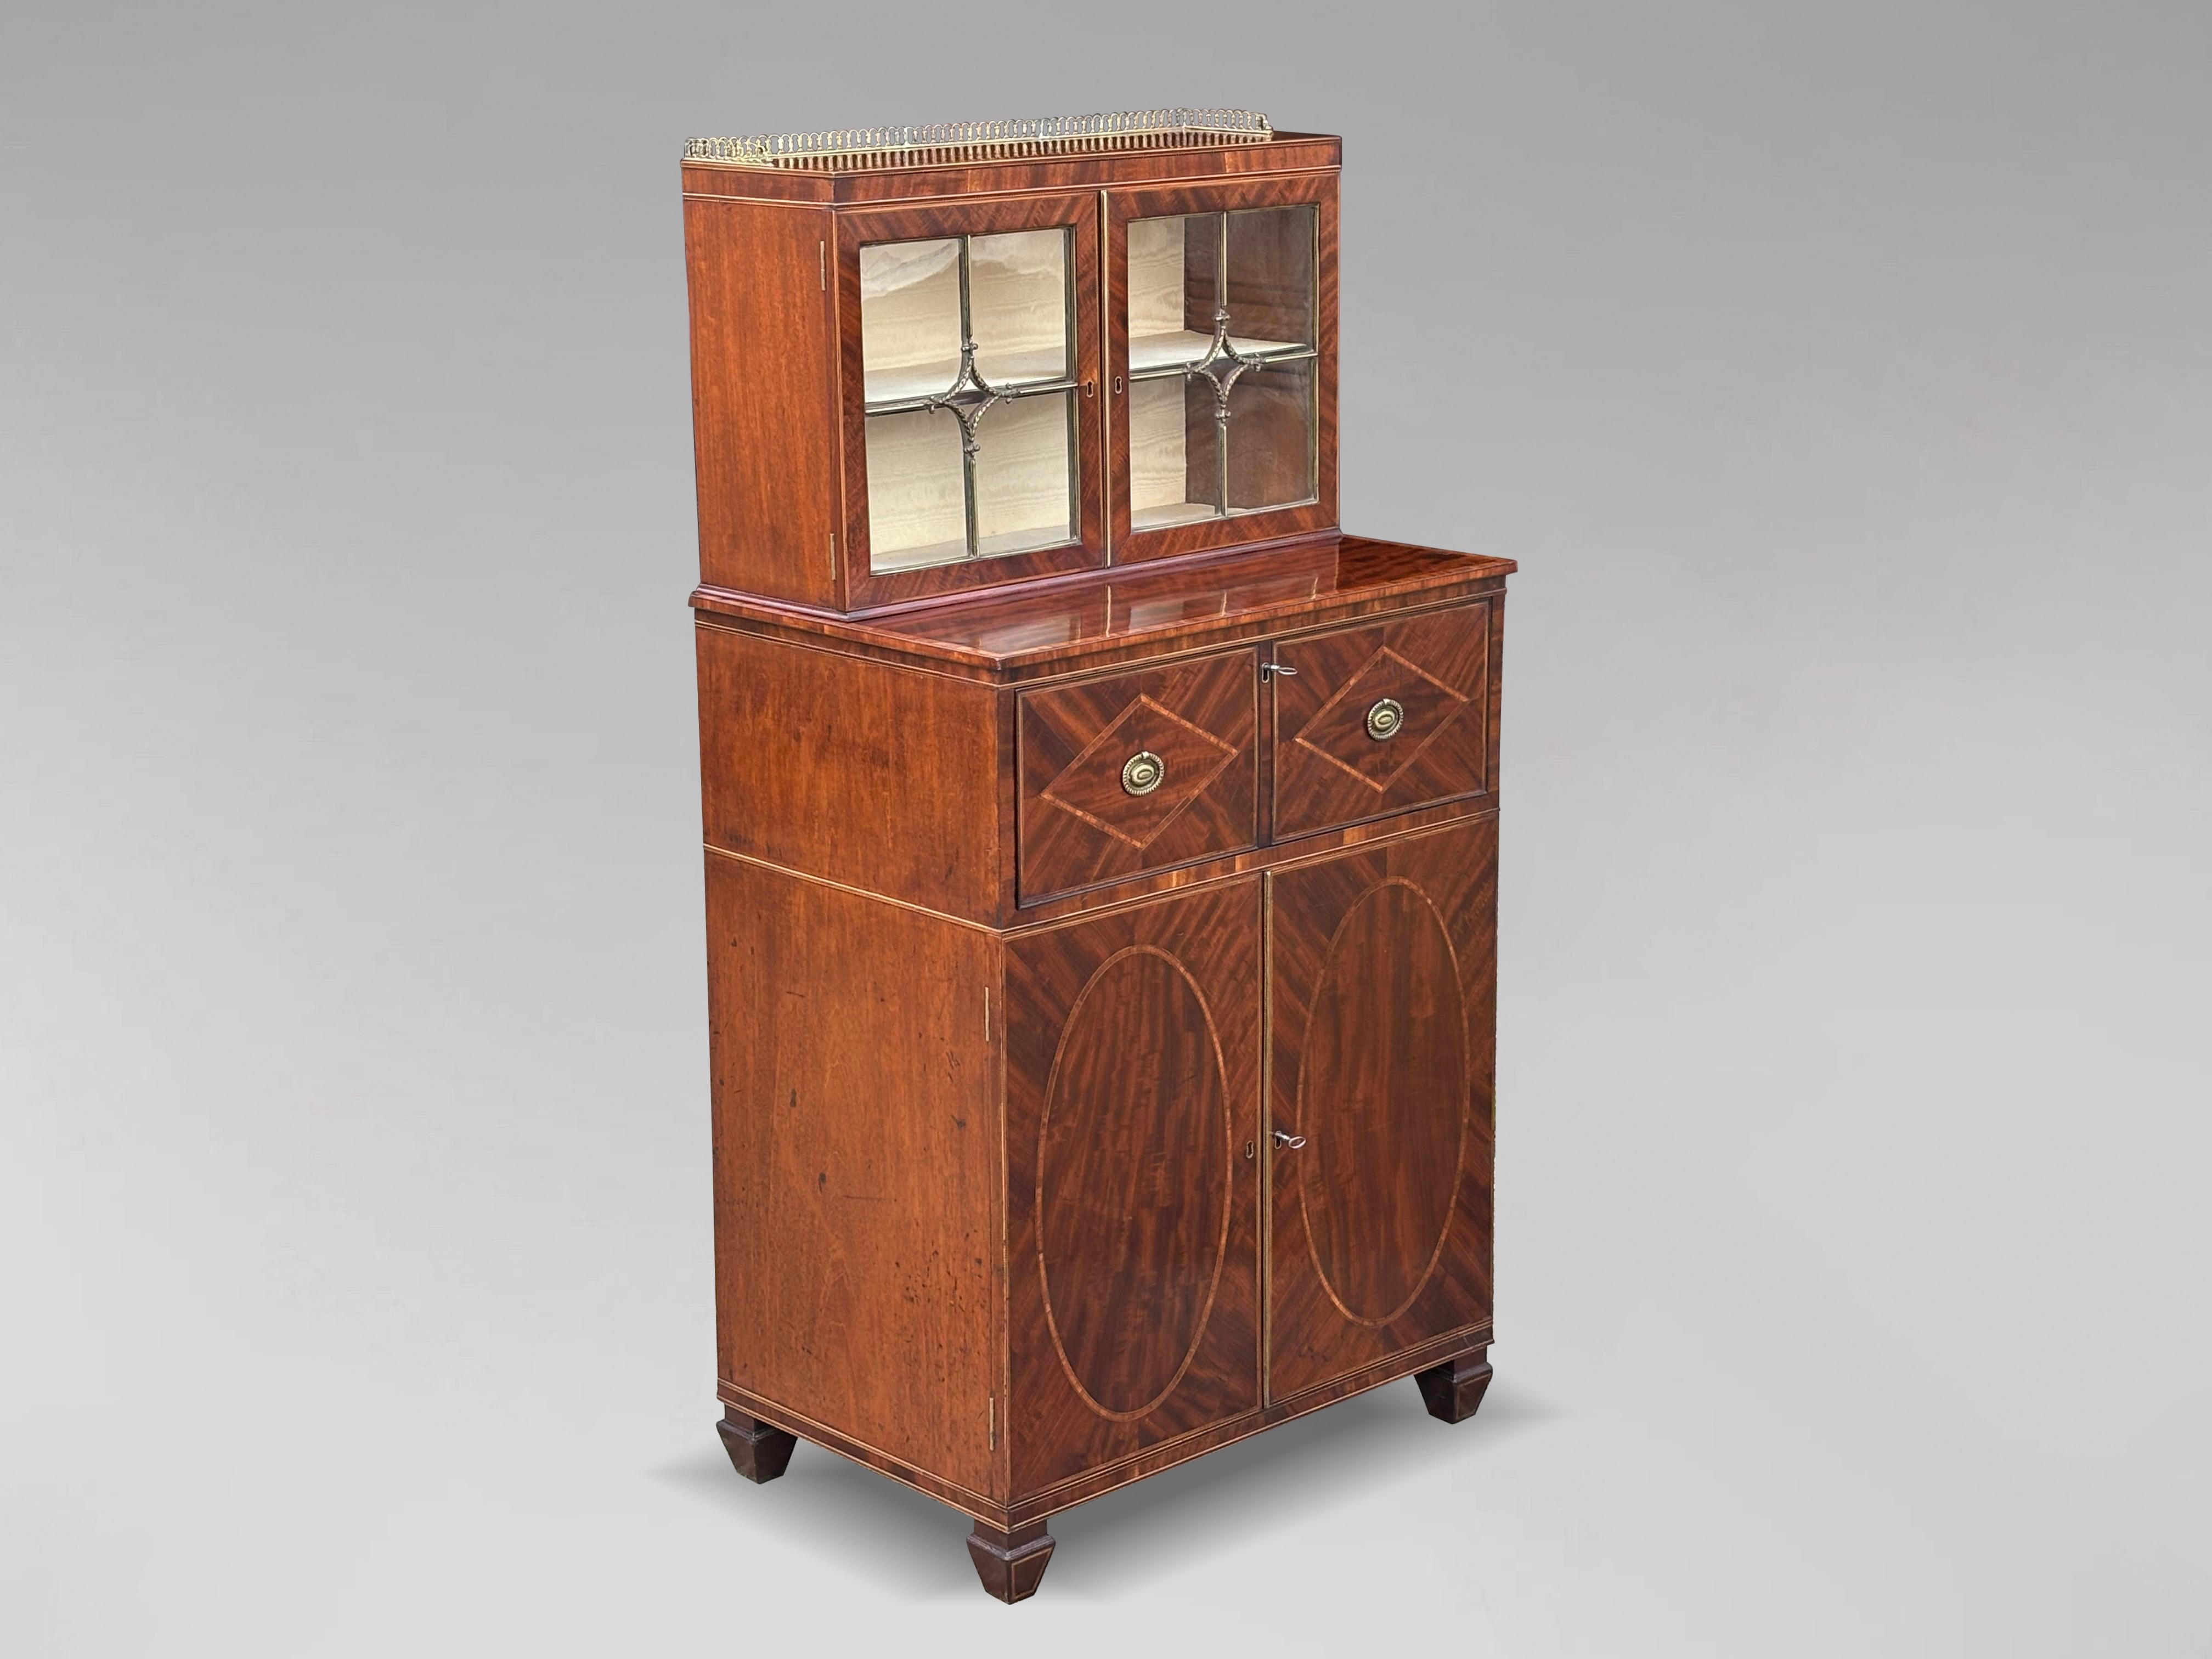 An exceptional fine early 19th century, Regency period brass, mahogany, satinwood and boxwood inlay secretaire bookcase. The upper section with a surmounted by an ornate fretted brass gallery, above a pair of brass astragal glazed doors, enclosing